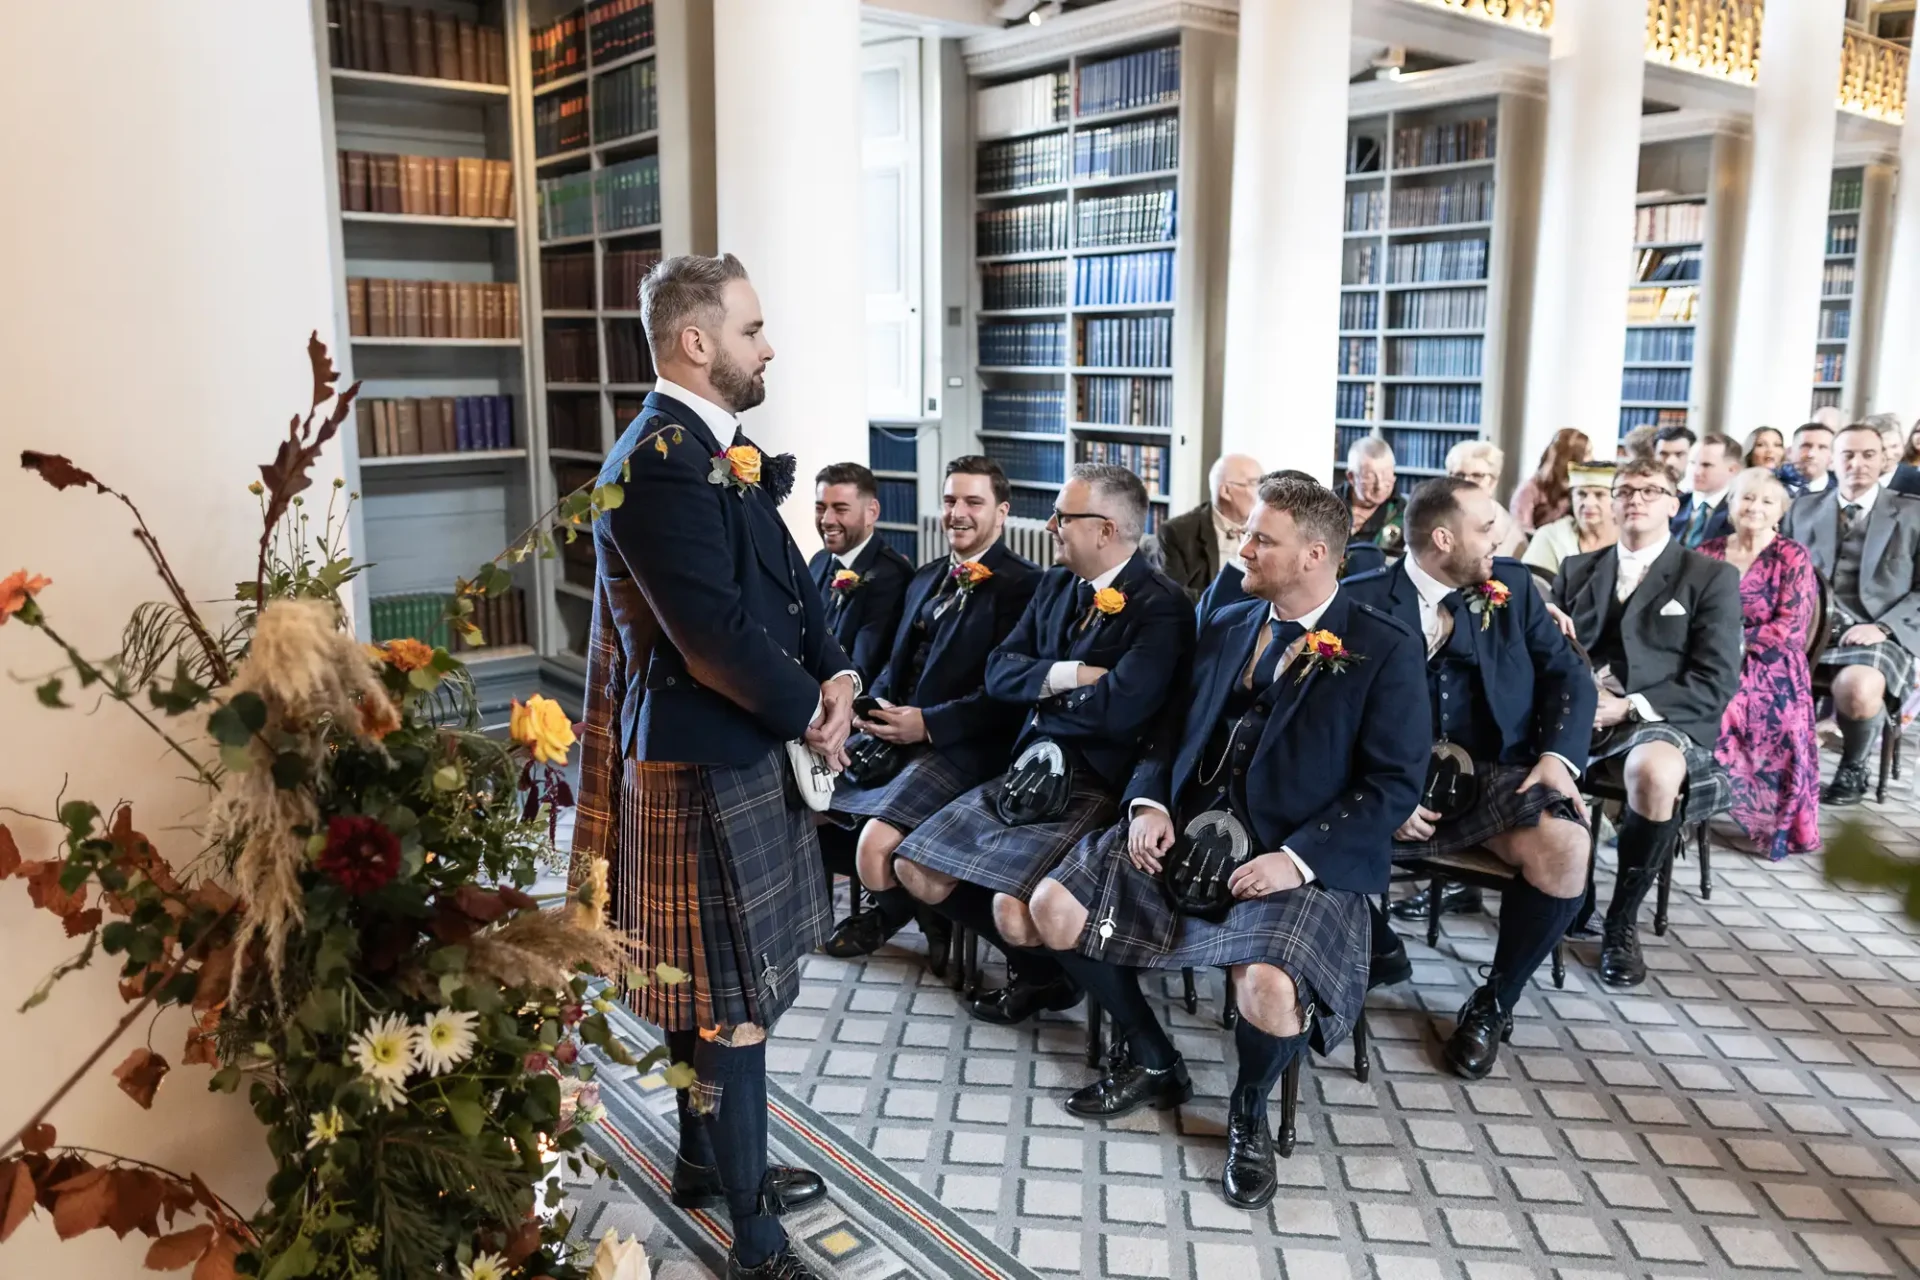 A groom in a kilt smiles at seated wedding guests, also mostly in kilts, in an elegant library setting adorned with floral decorations.